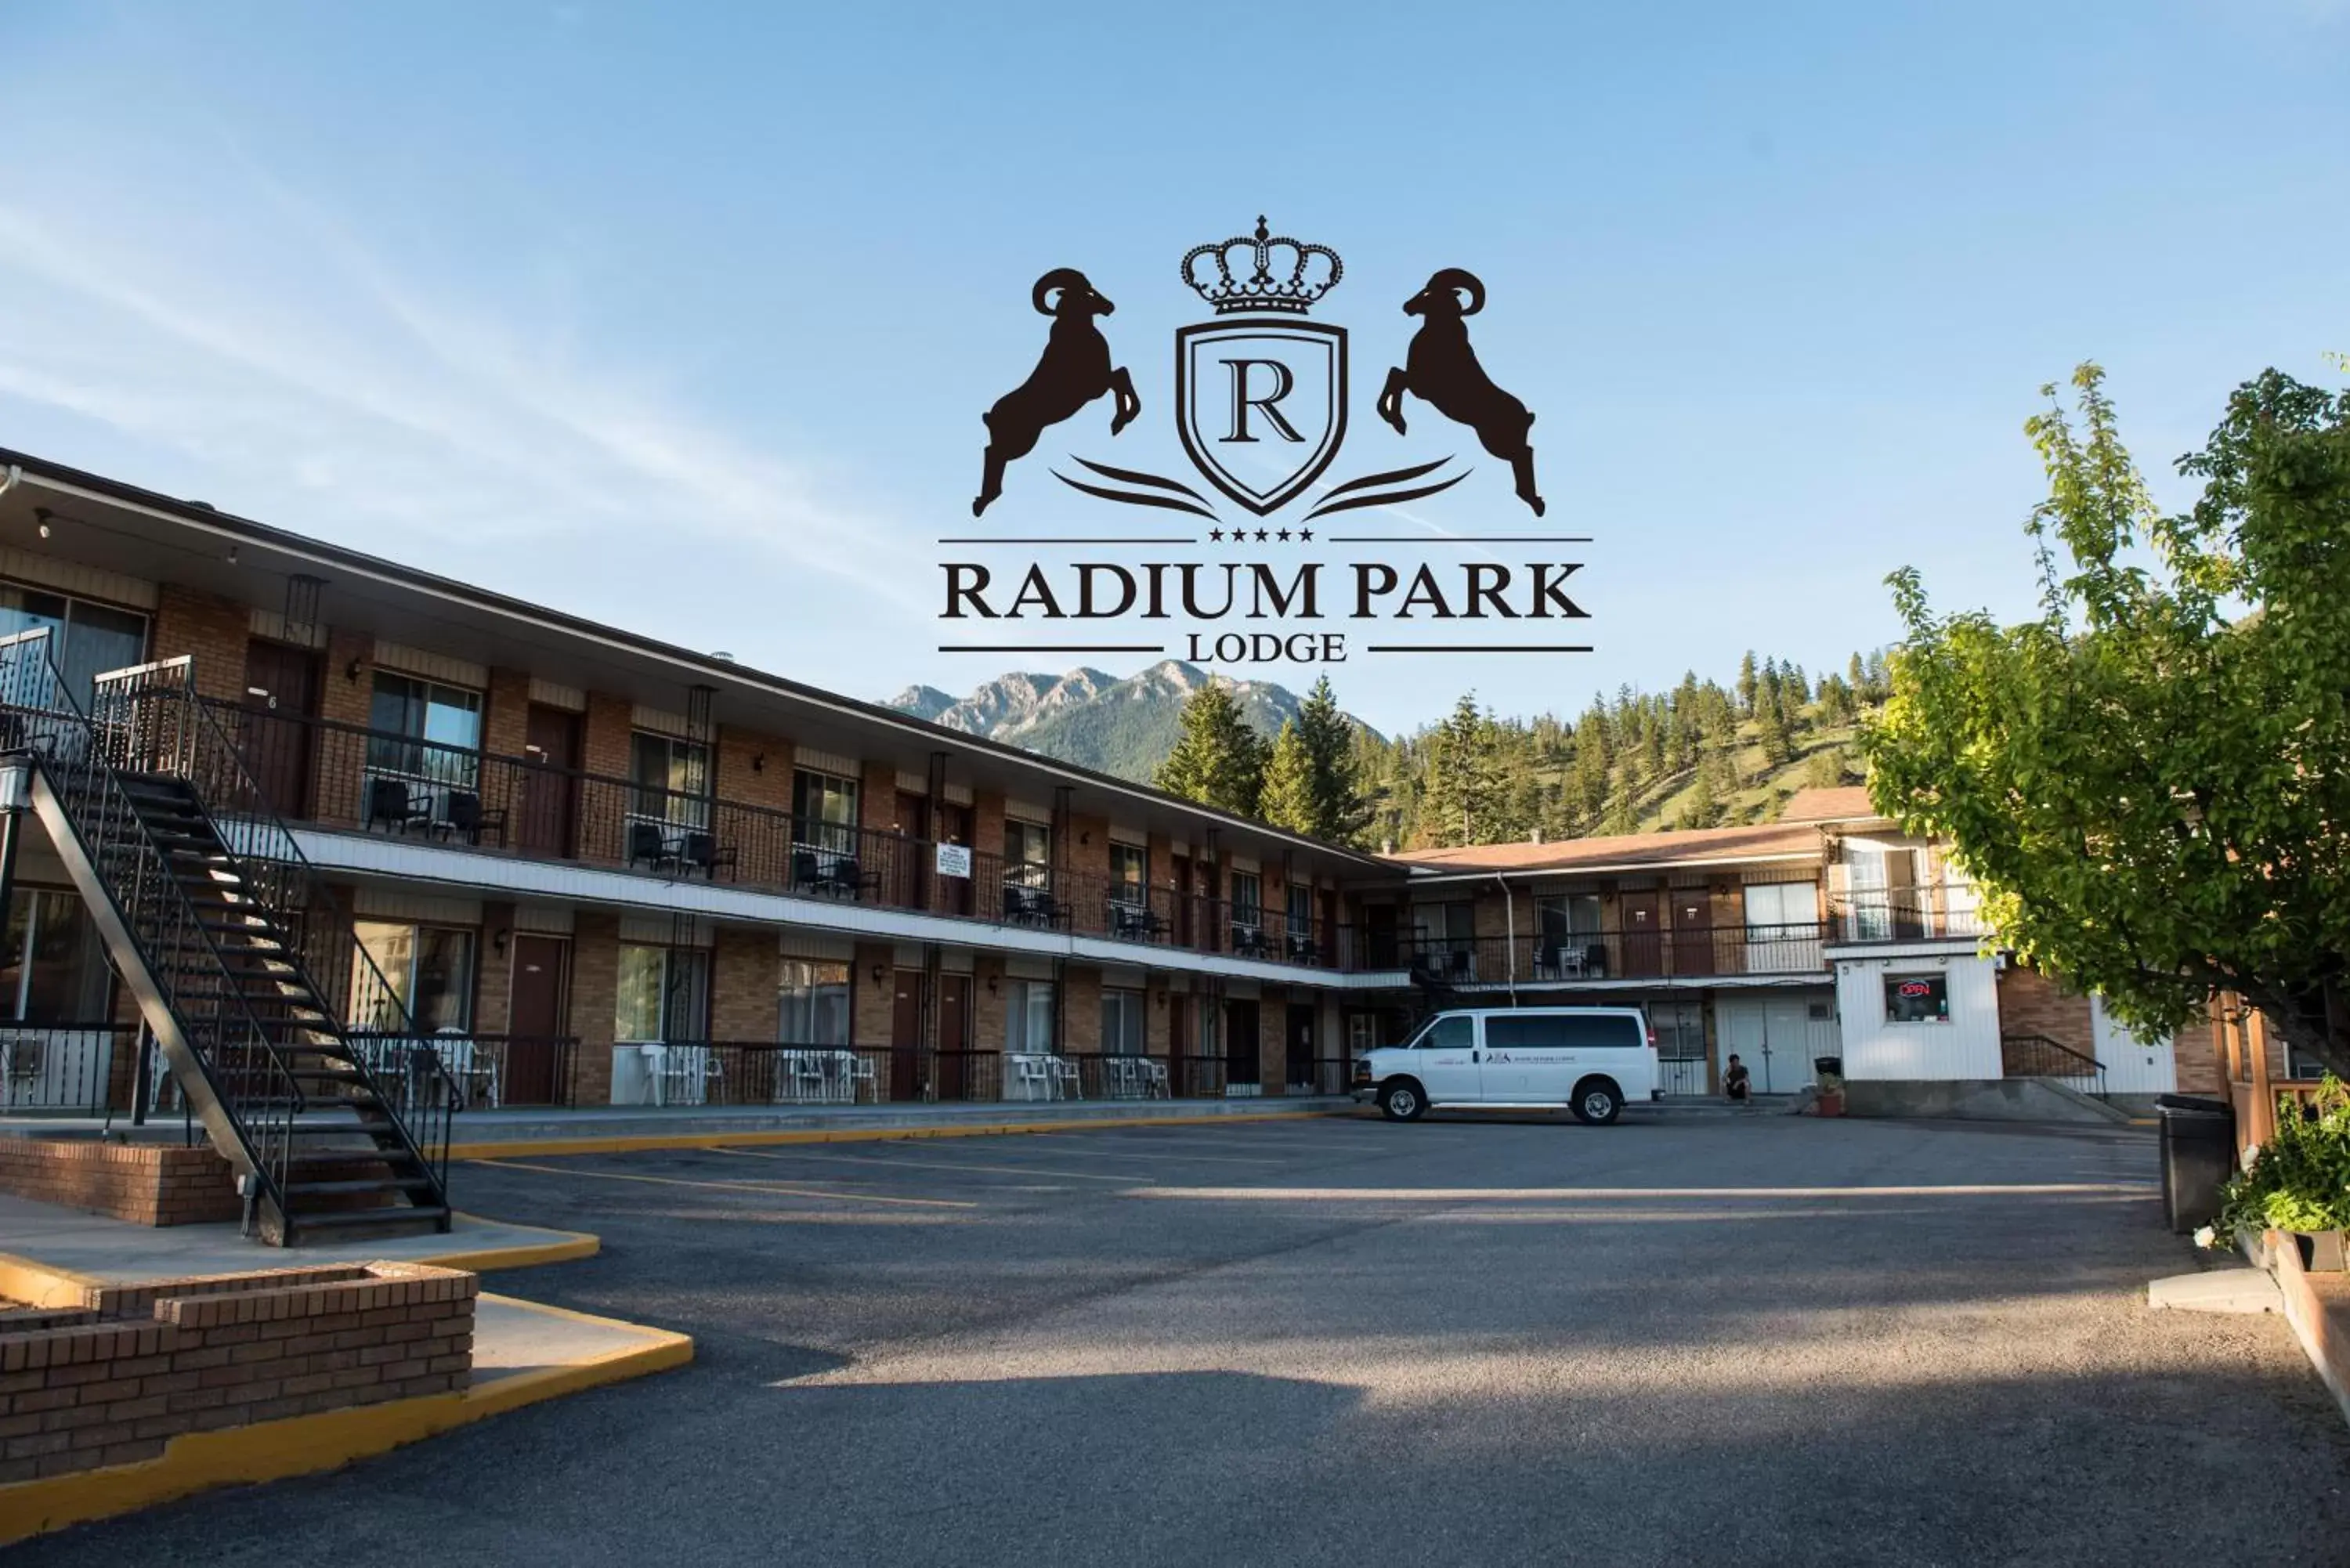 Property logo or sign, Property Building in Radium Park Lodge